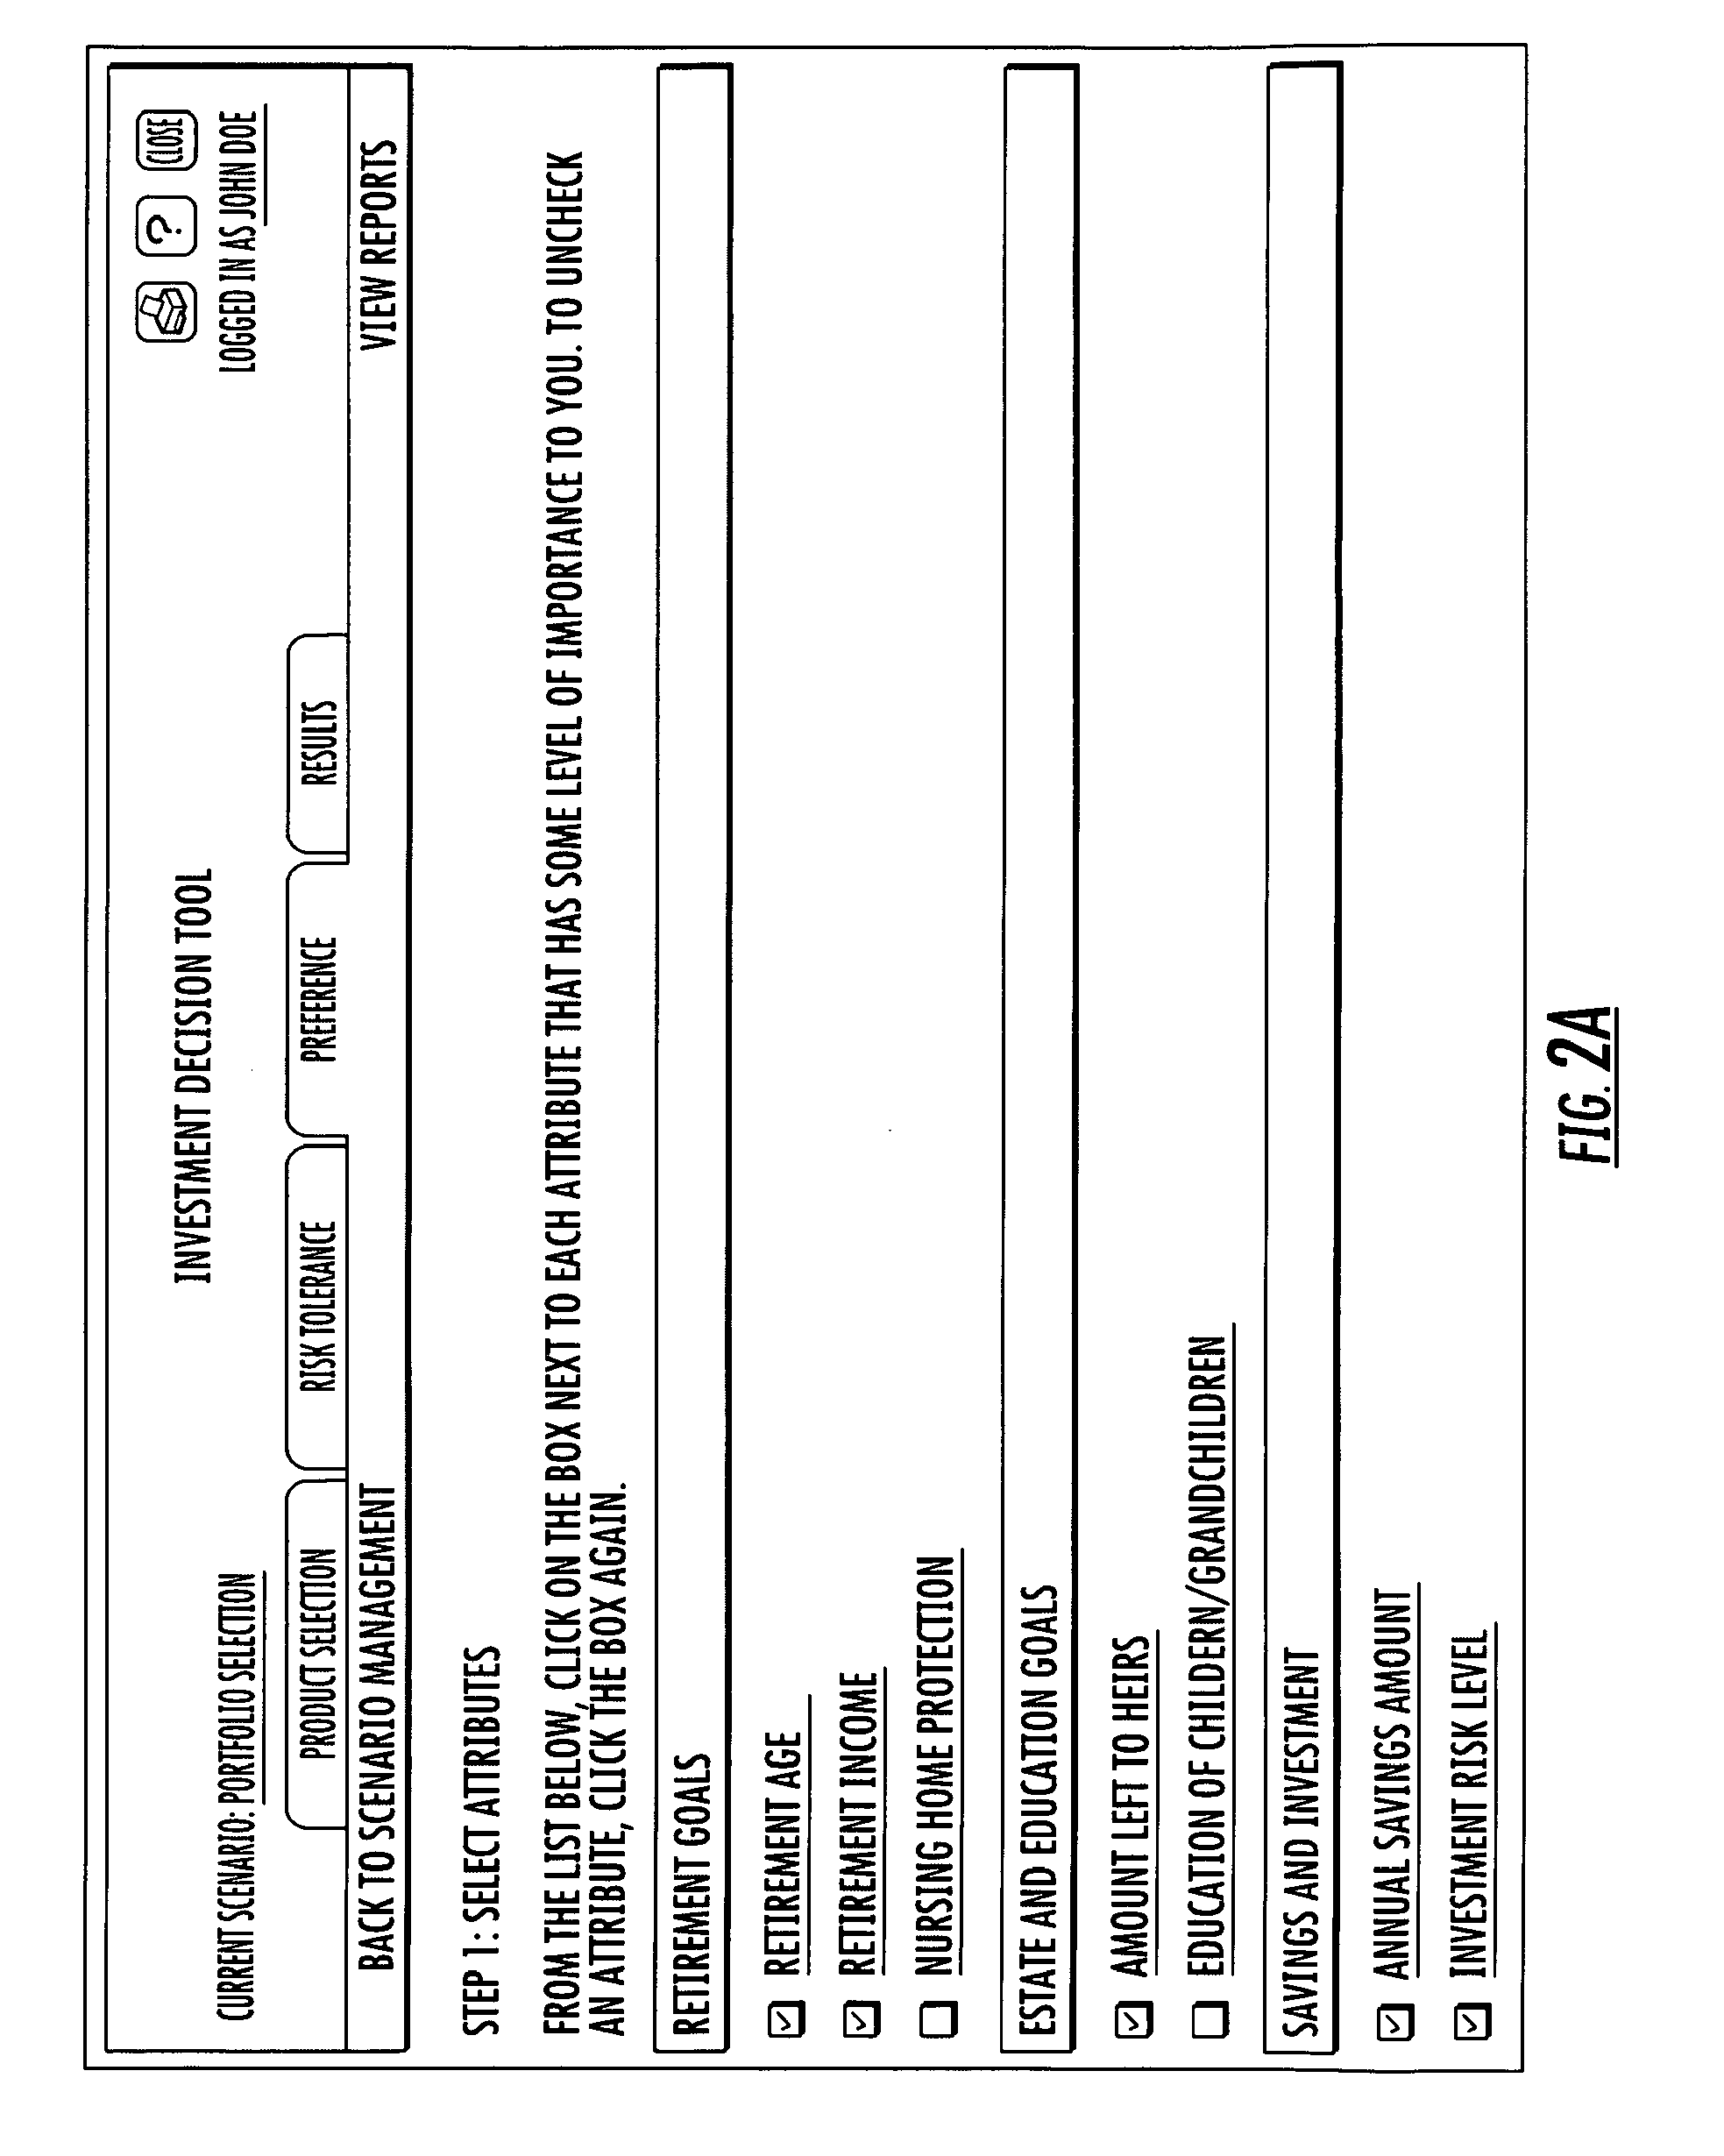 Method and System for Using Risk Tolerance and Life Goal Preferences and Rankings to Enhance